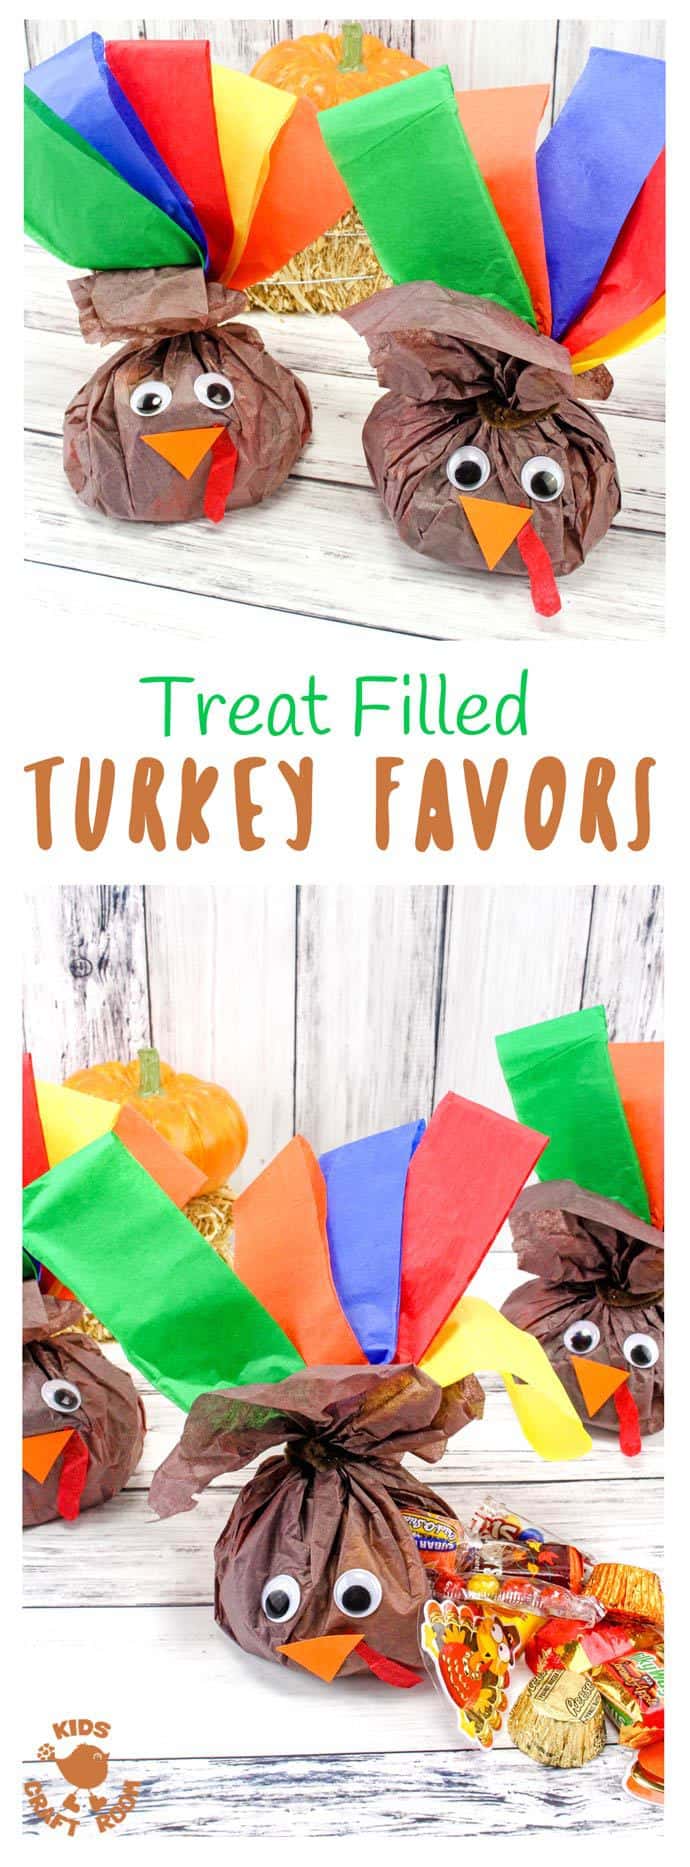 Cute and Easy Candy-Stuffed Turkey Favors by Kids Craft Room